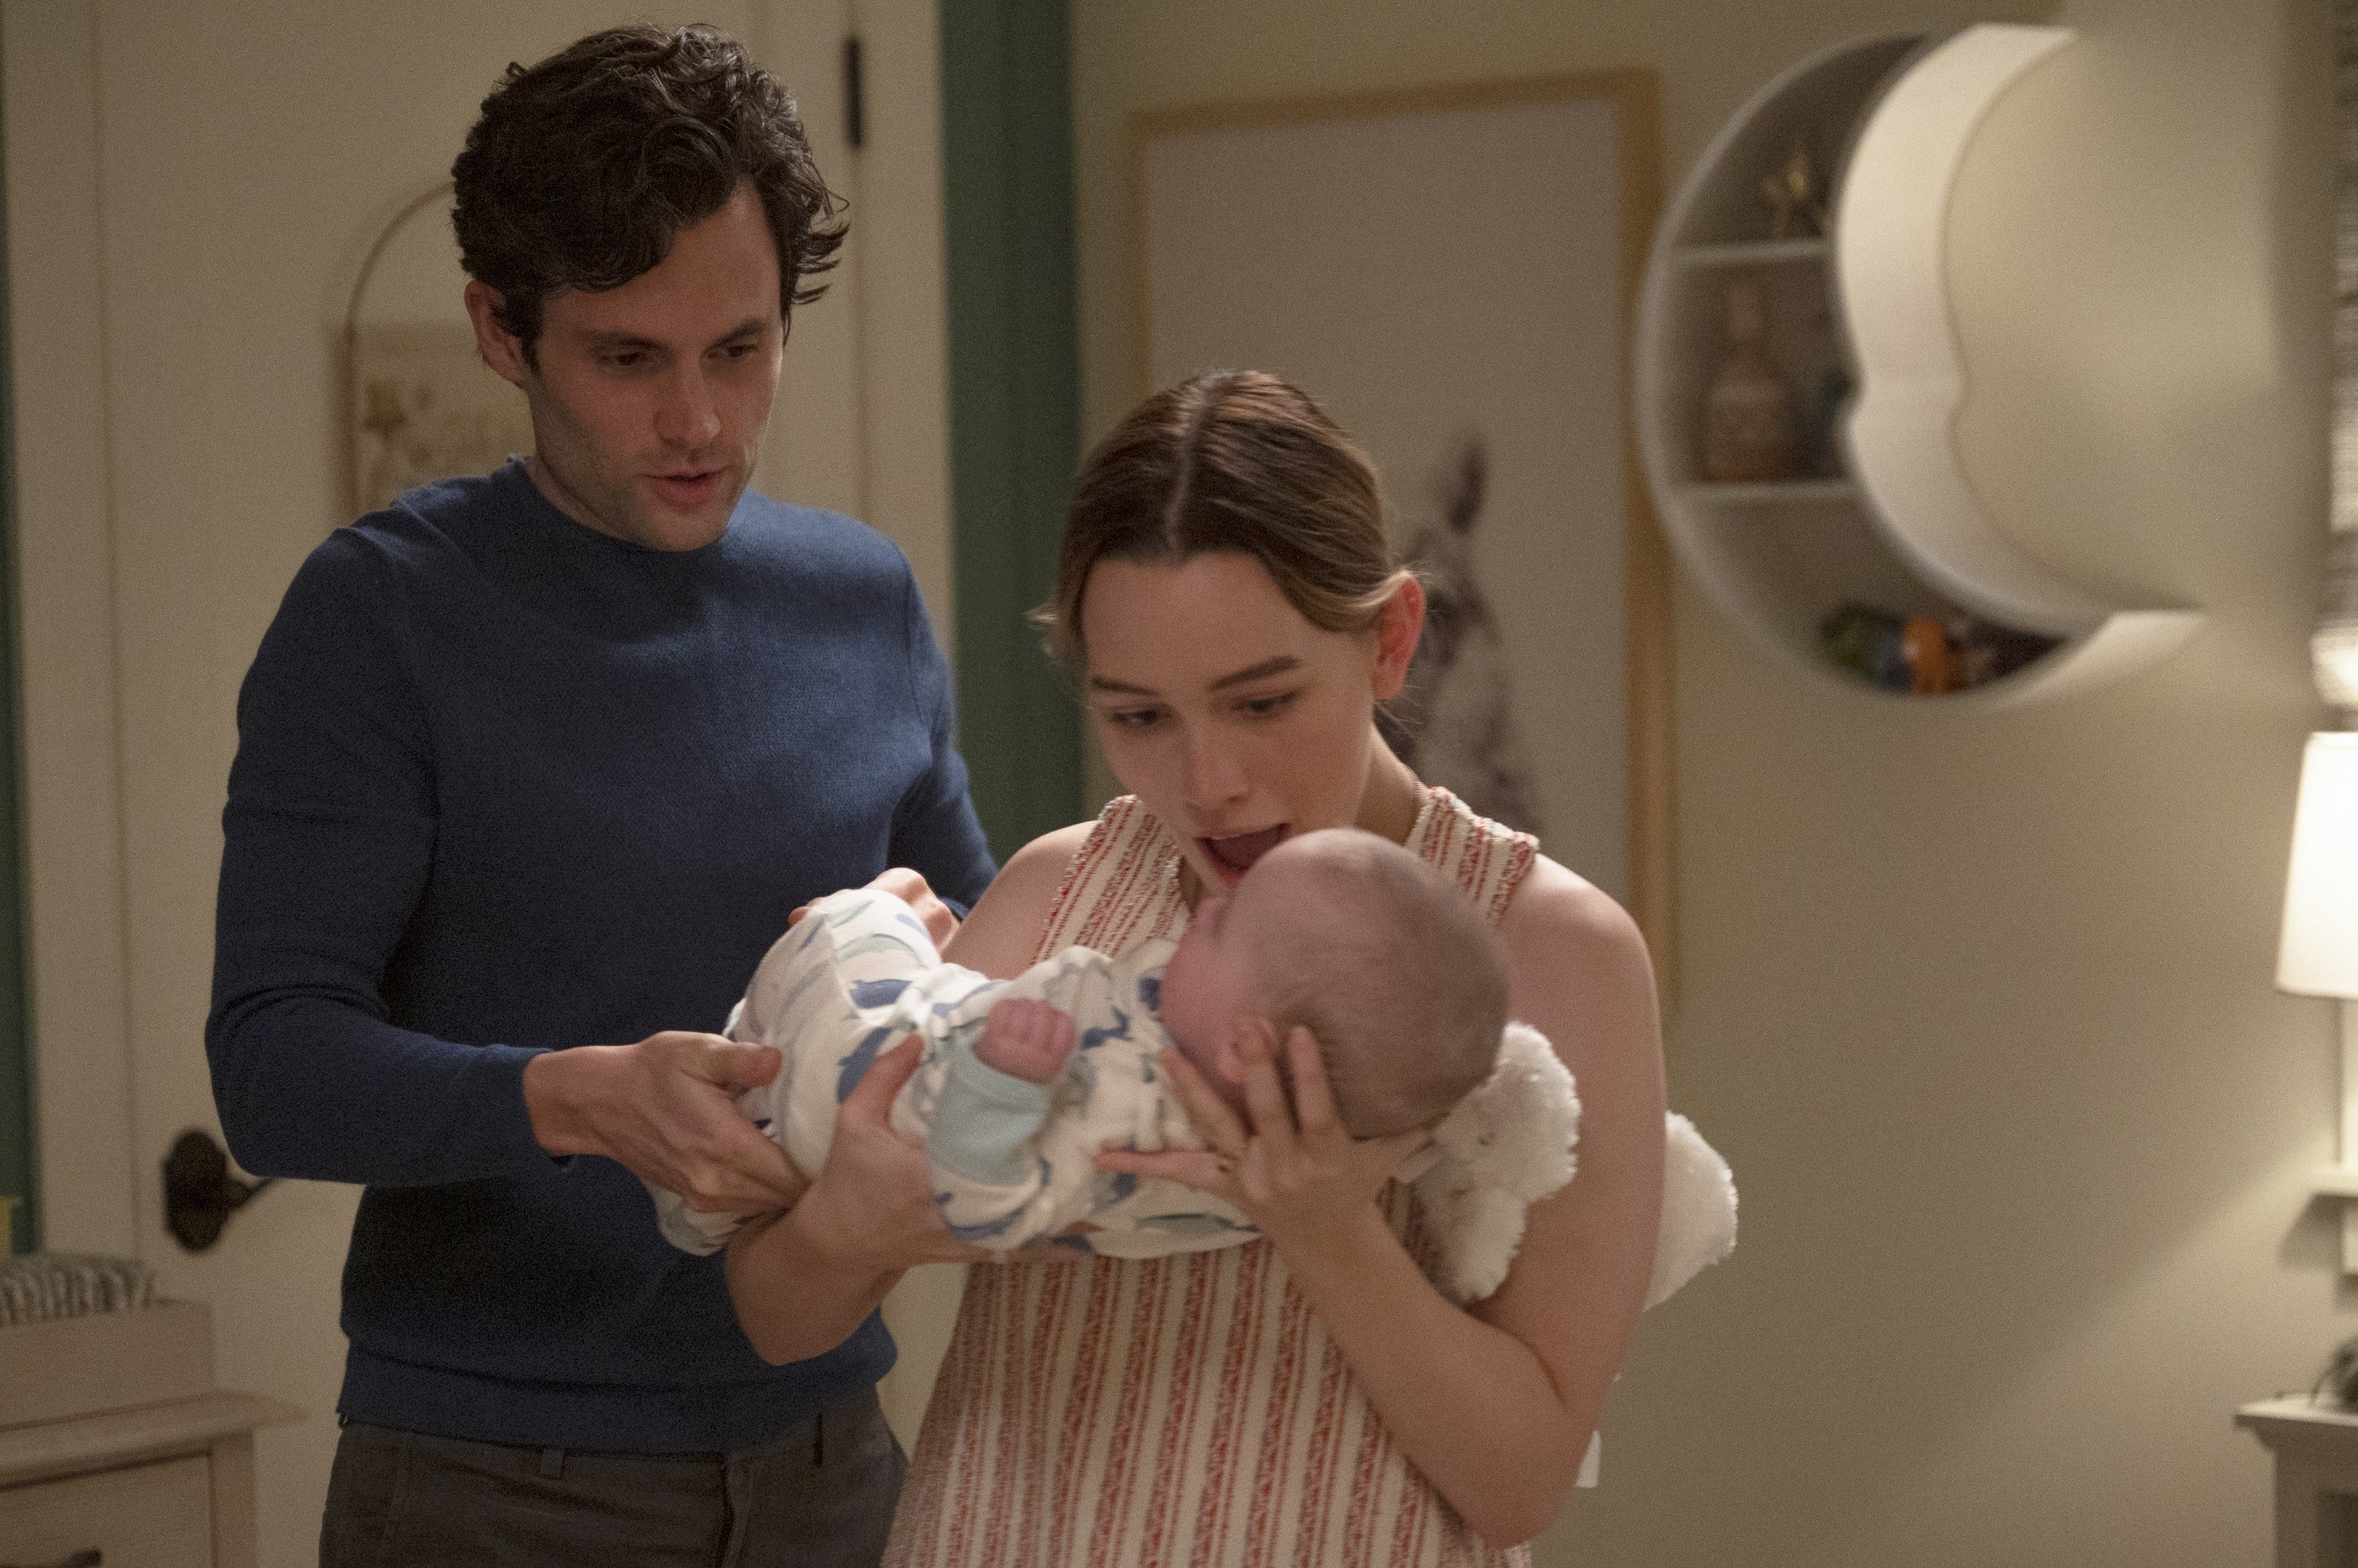 the two characters with their baby